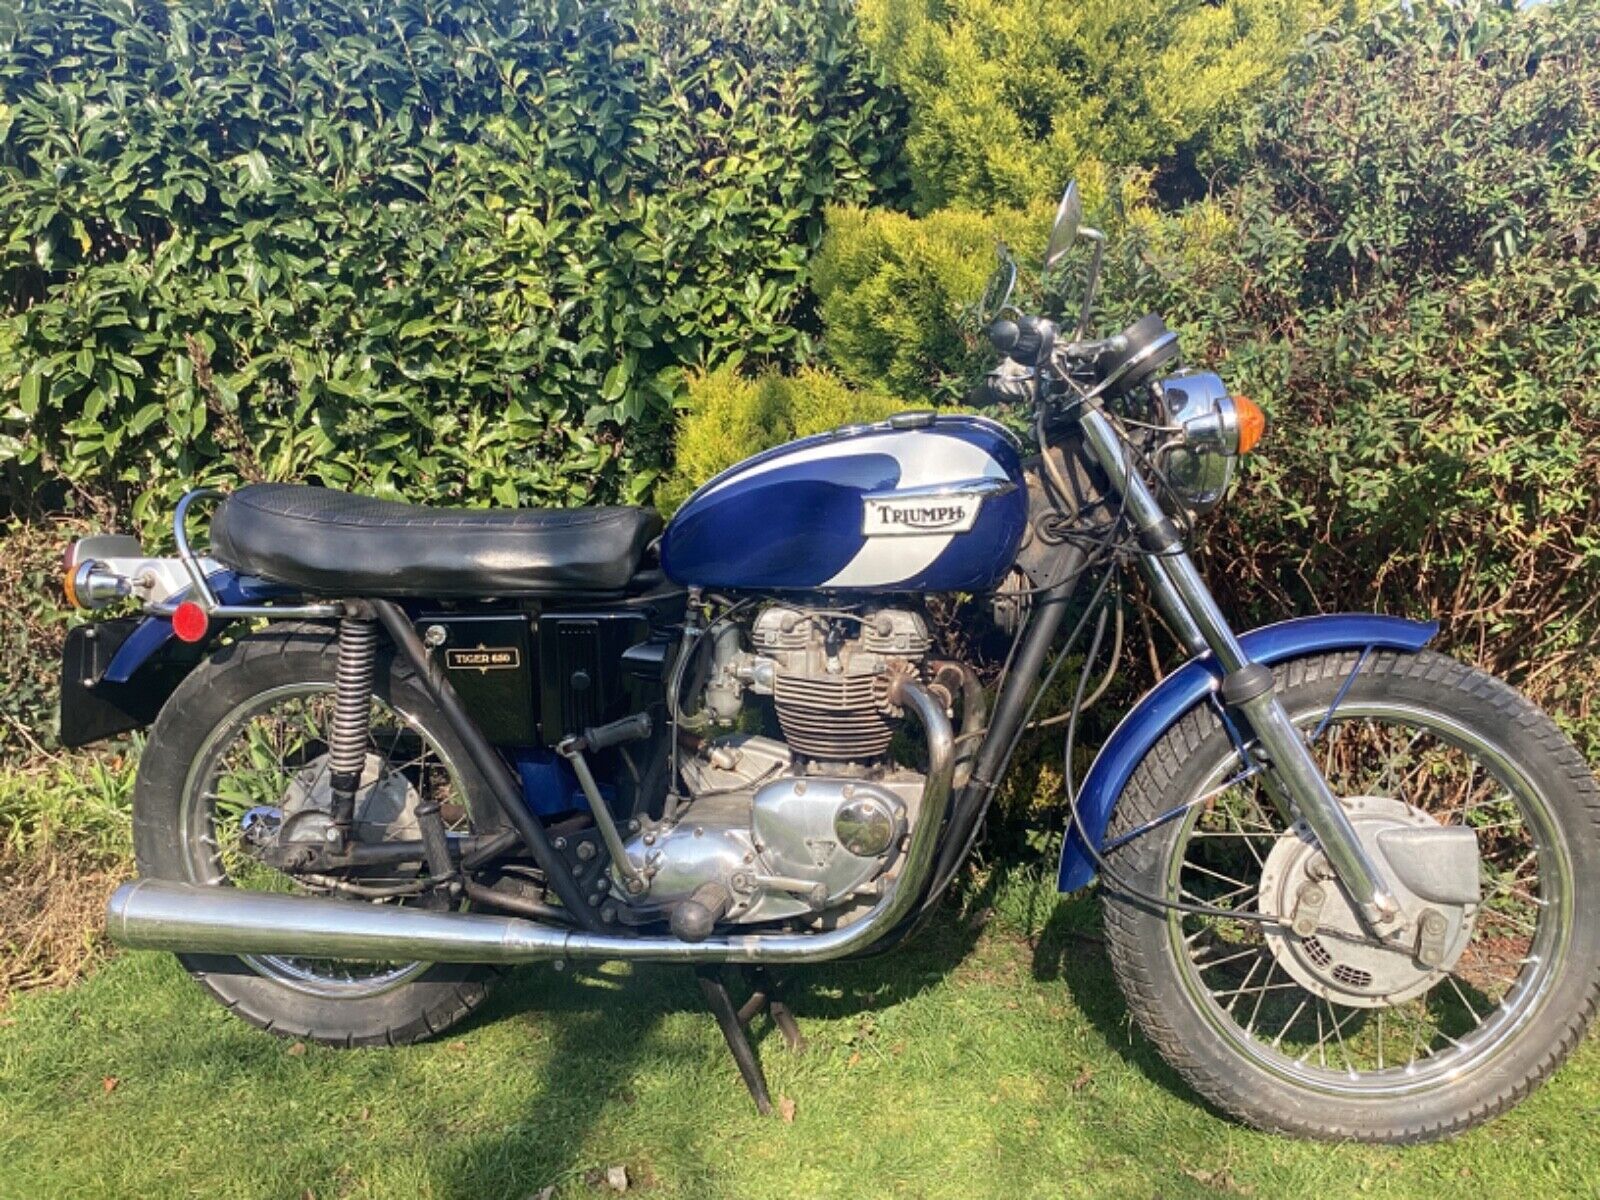 TRIUMPH TIGER 650 TR6R 1972 excellent runner 14500 miles with V5c - Picture 1 of 13